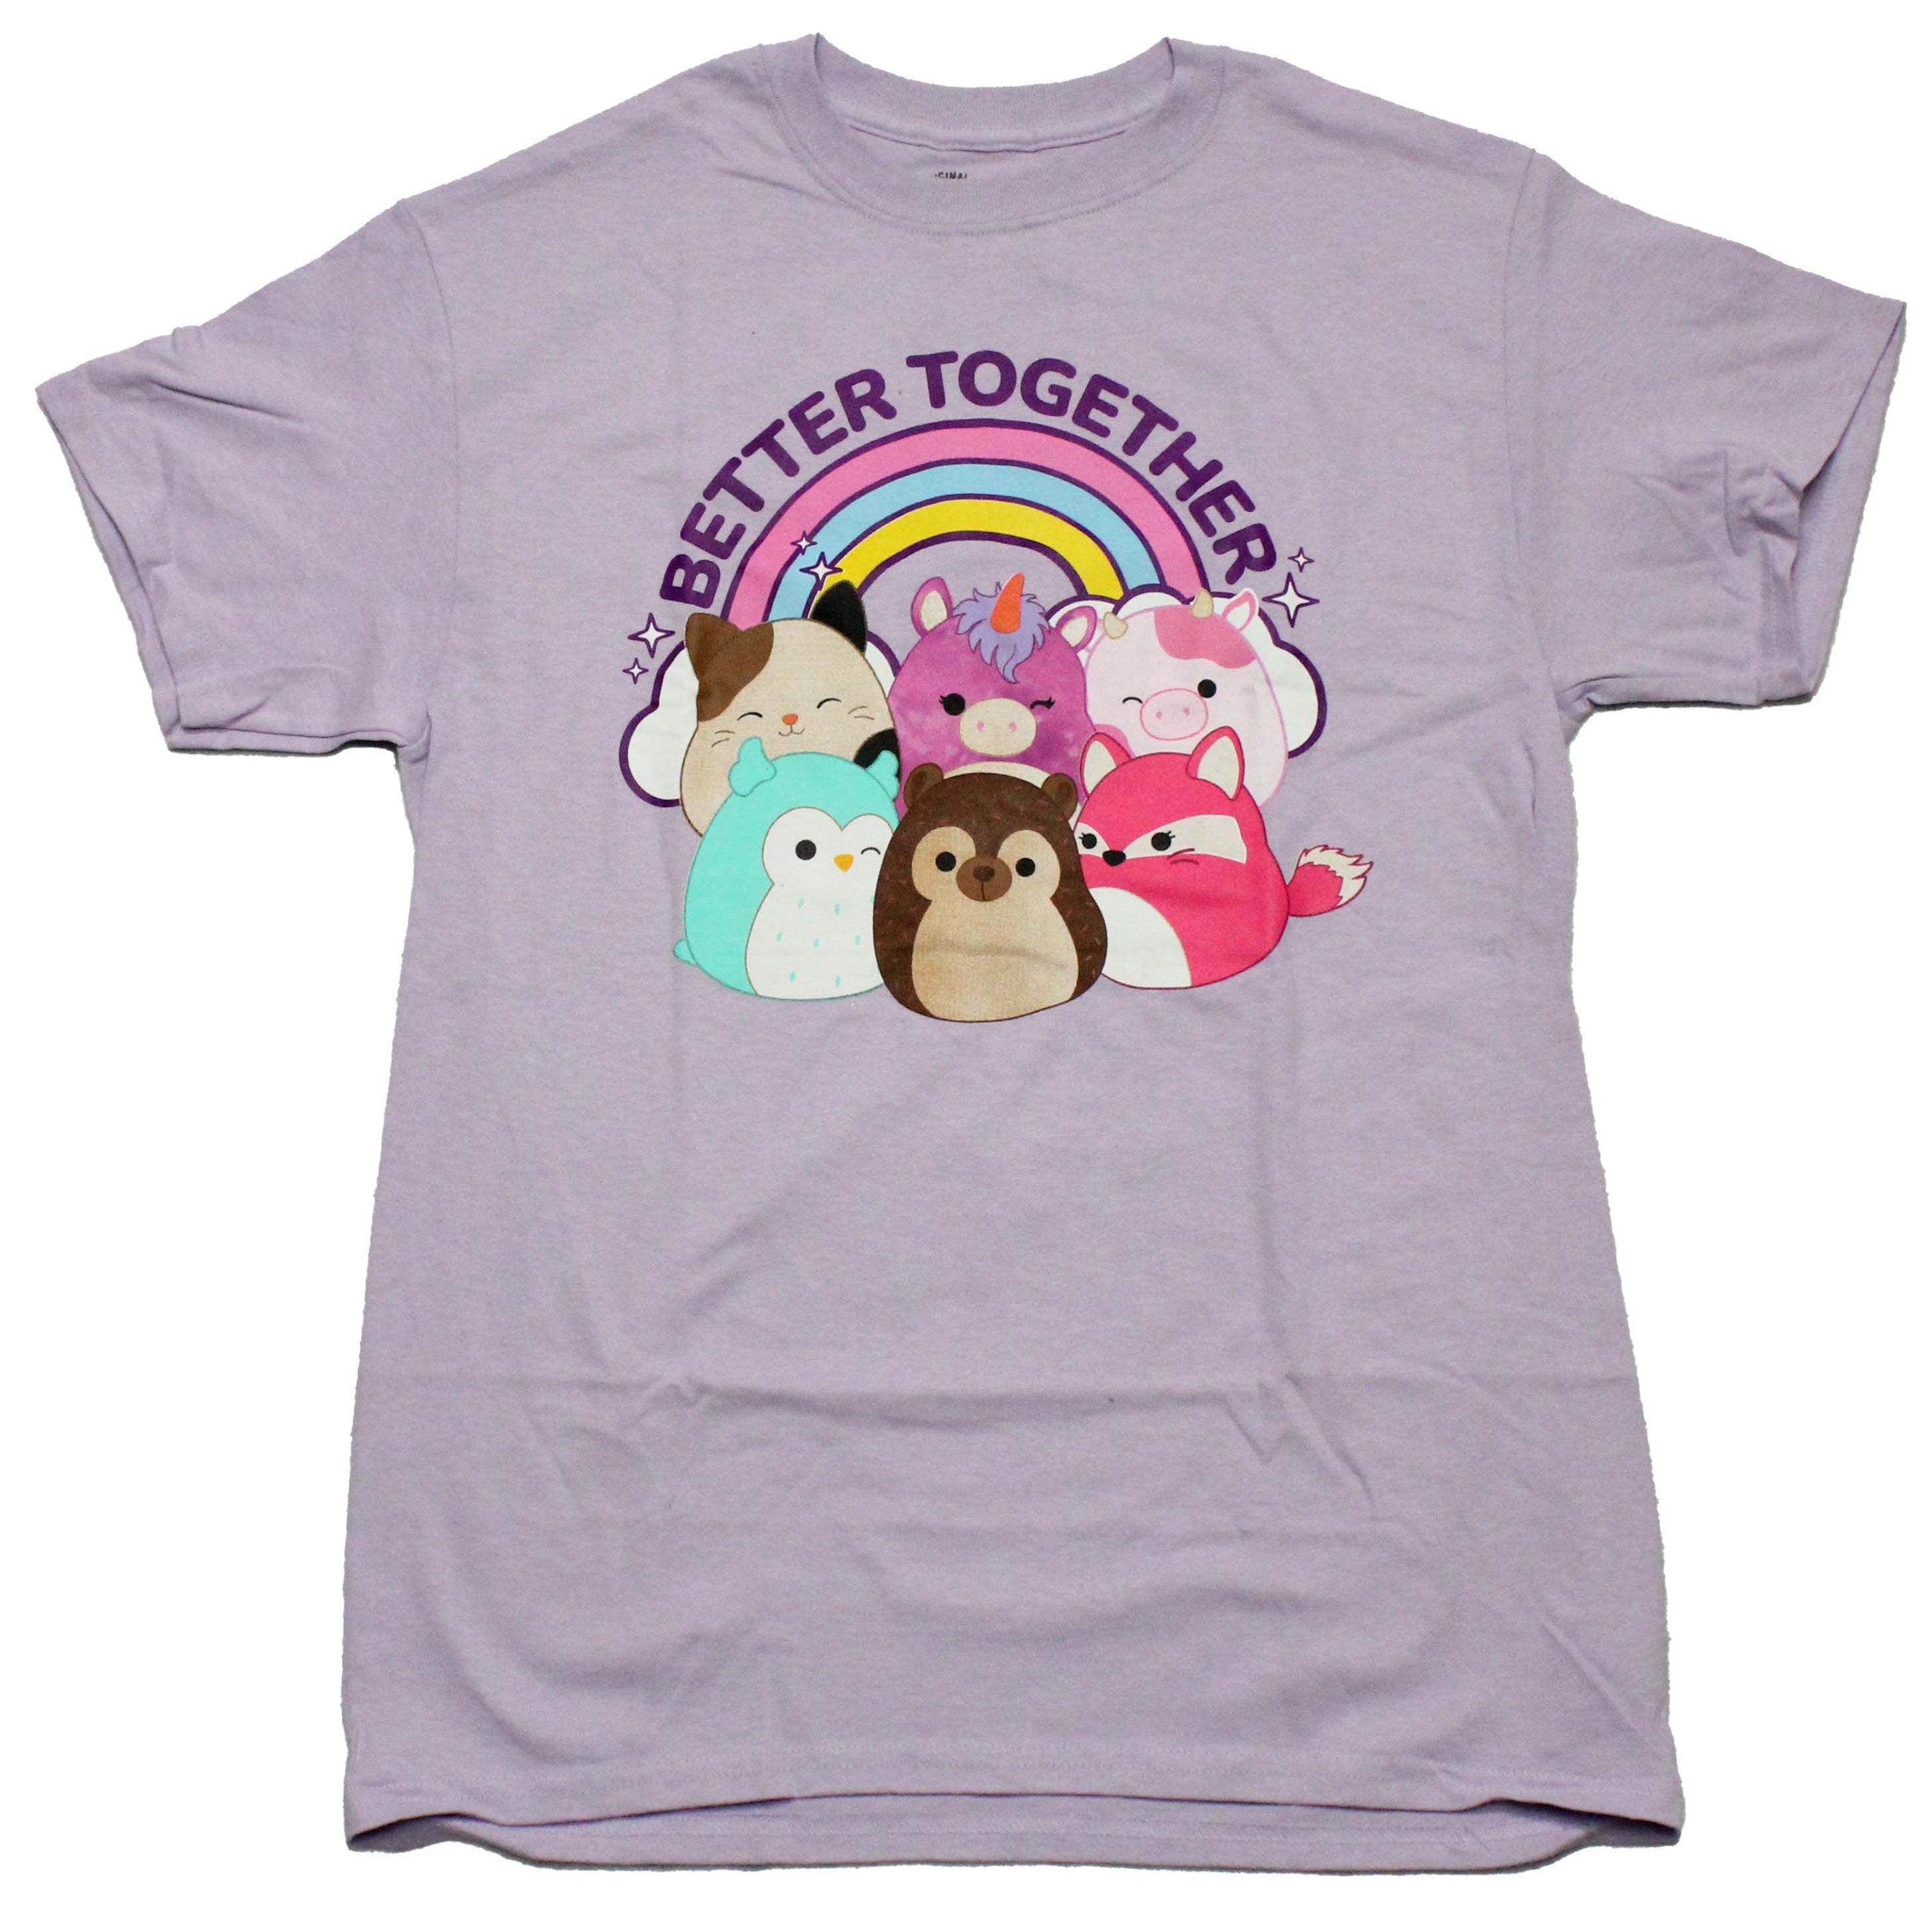 Squishmallows Mens T-Shirt - Better Together Group Under Rainbow